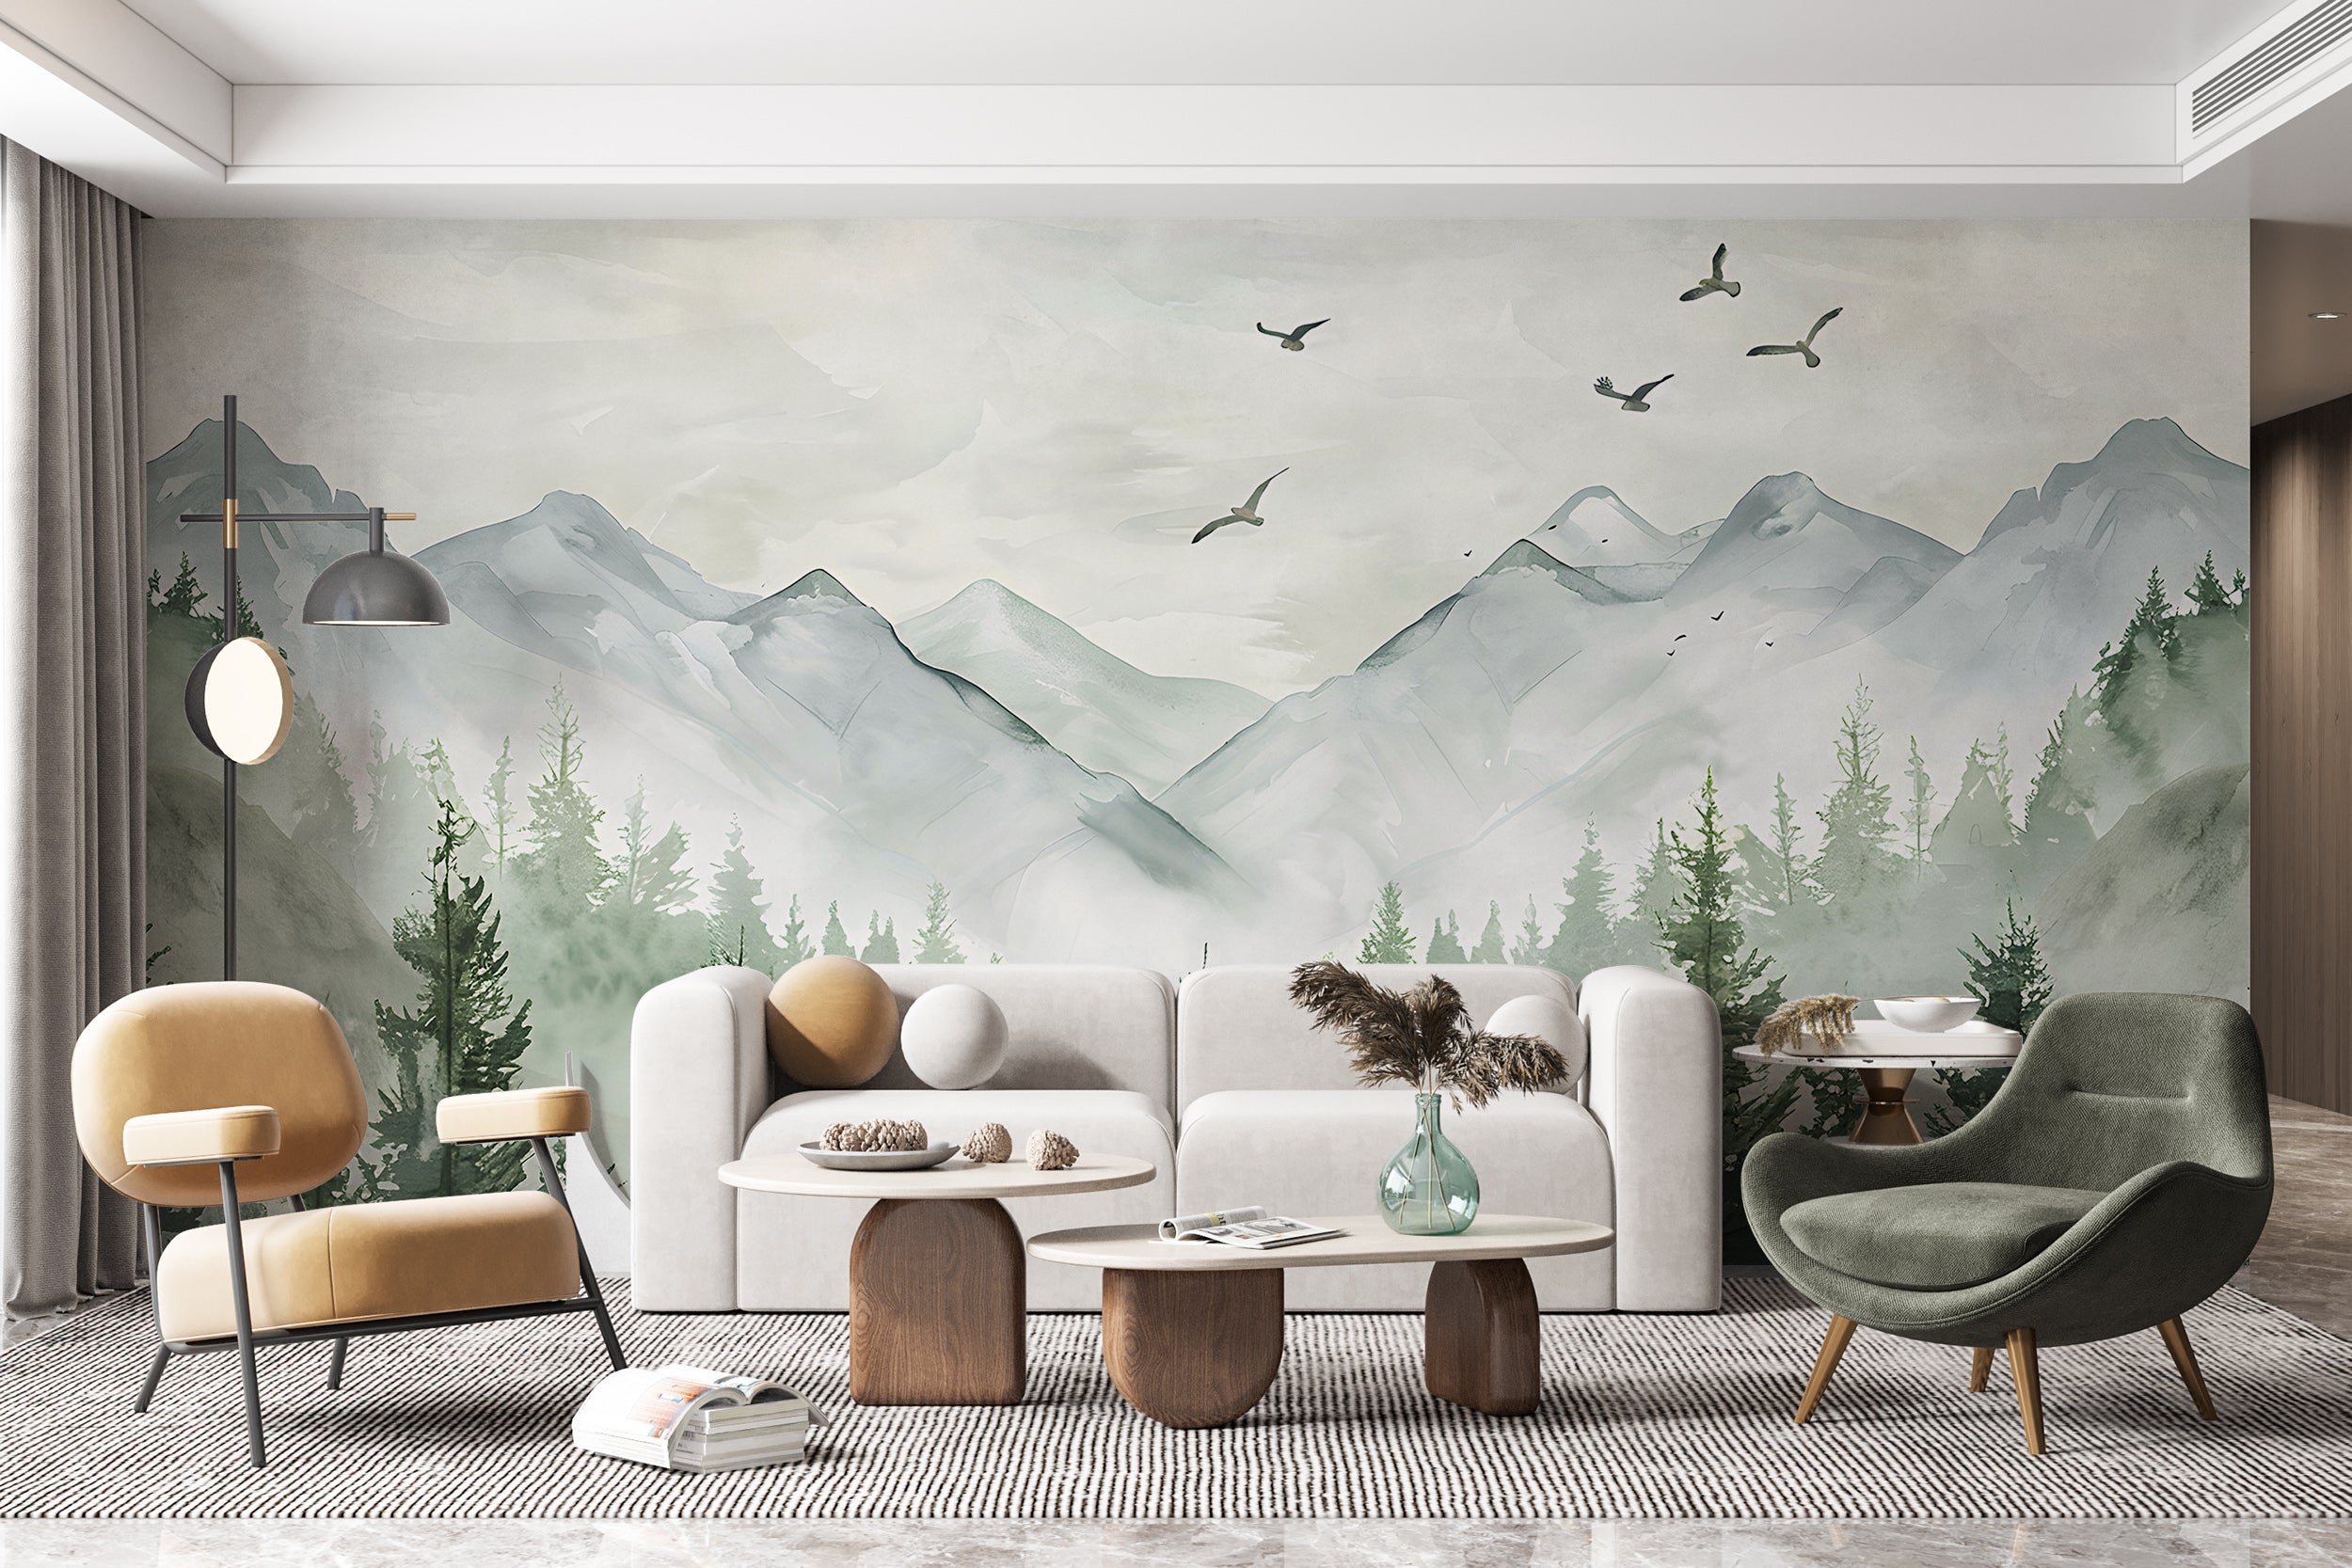 Minimalistic Mountains Mural, Watercolor Forest and Mountain Landscape Wallpaper, Removable Pastel Colors Nature Wall Decor